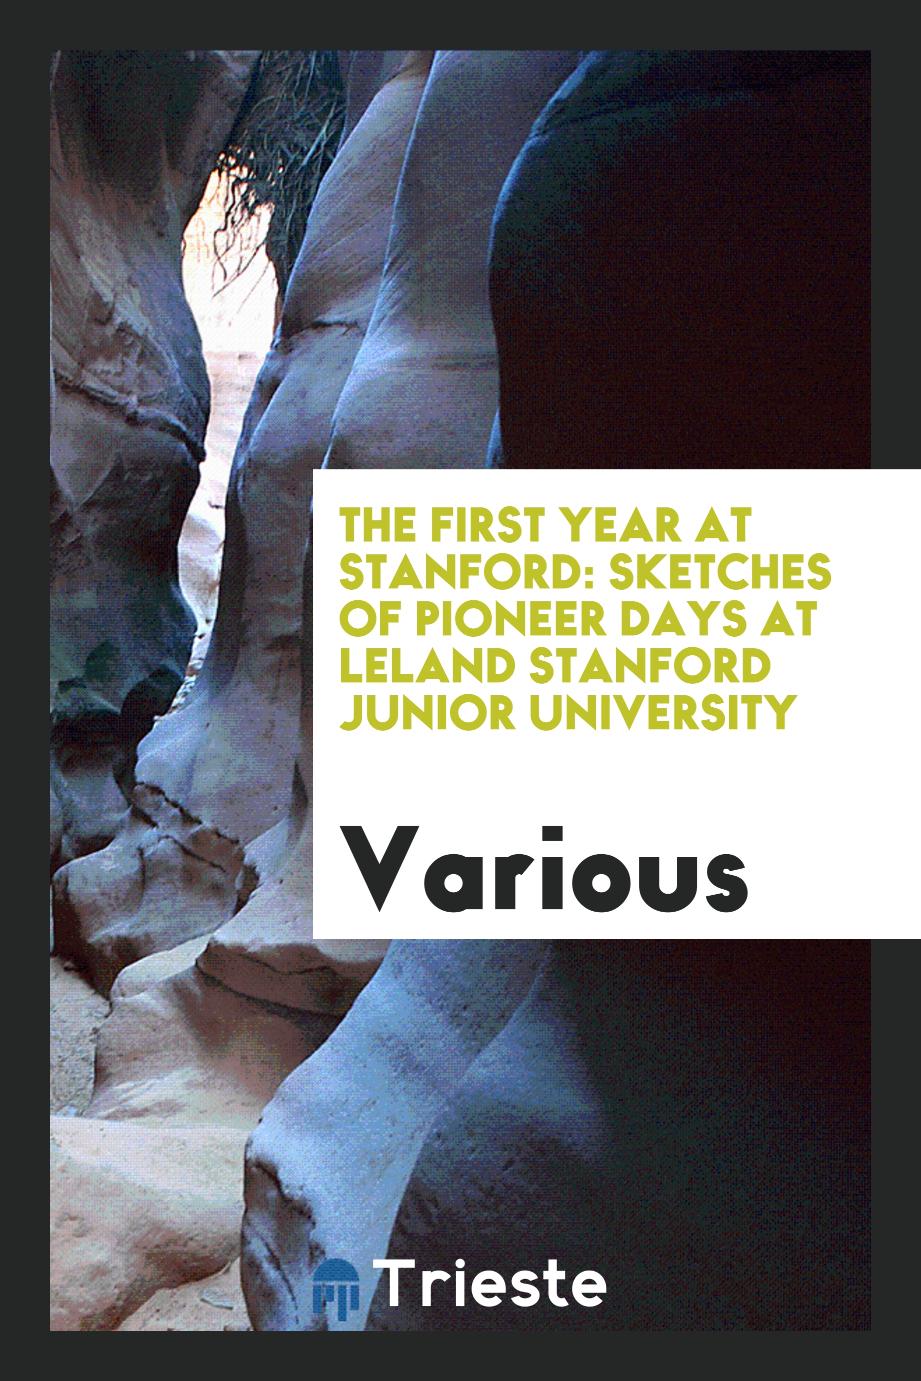 The First Year at Stanford: Sketches of Pioneer Days at Leland Stanford Junior University